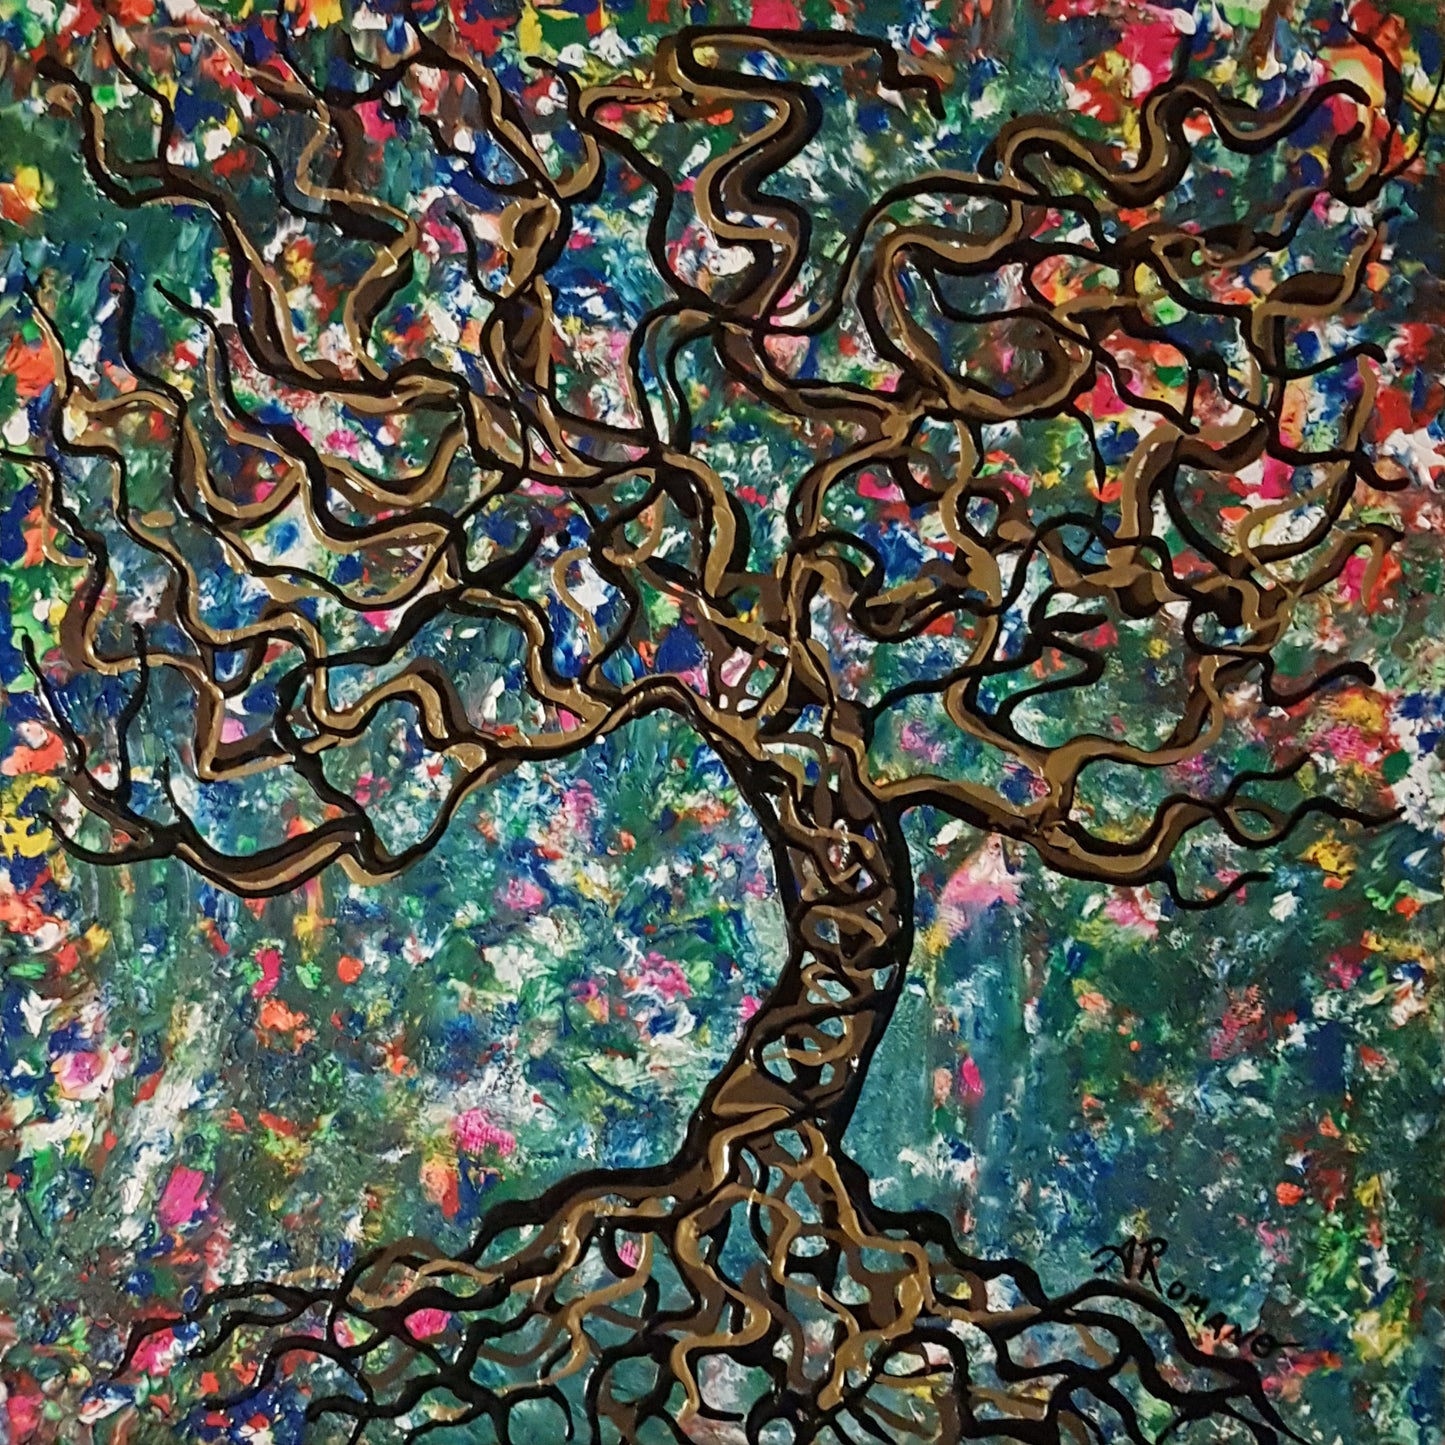 Roots-by-Alexandra-Romano-Art-Original-Paintings-for-Sale-Whimsical-Textured-Tree-Branches-Painting-Gold-Black-Colorful-Artwork-Best-Artists-Online